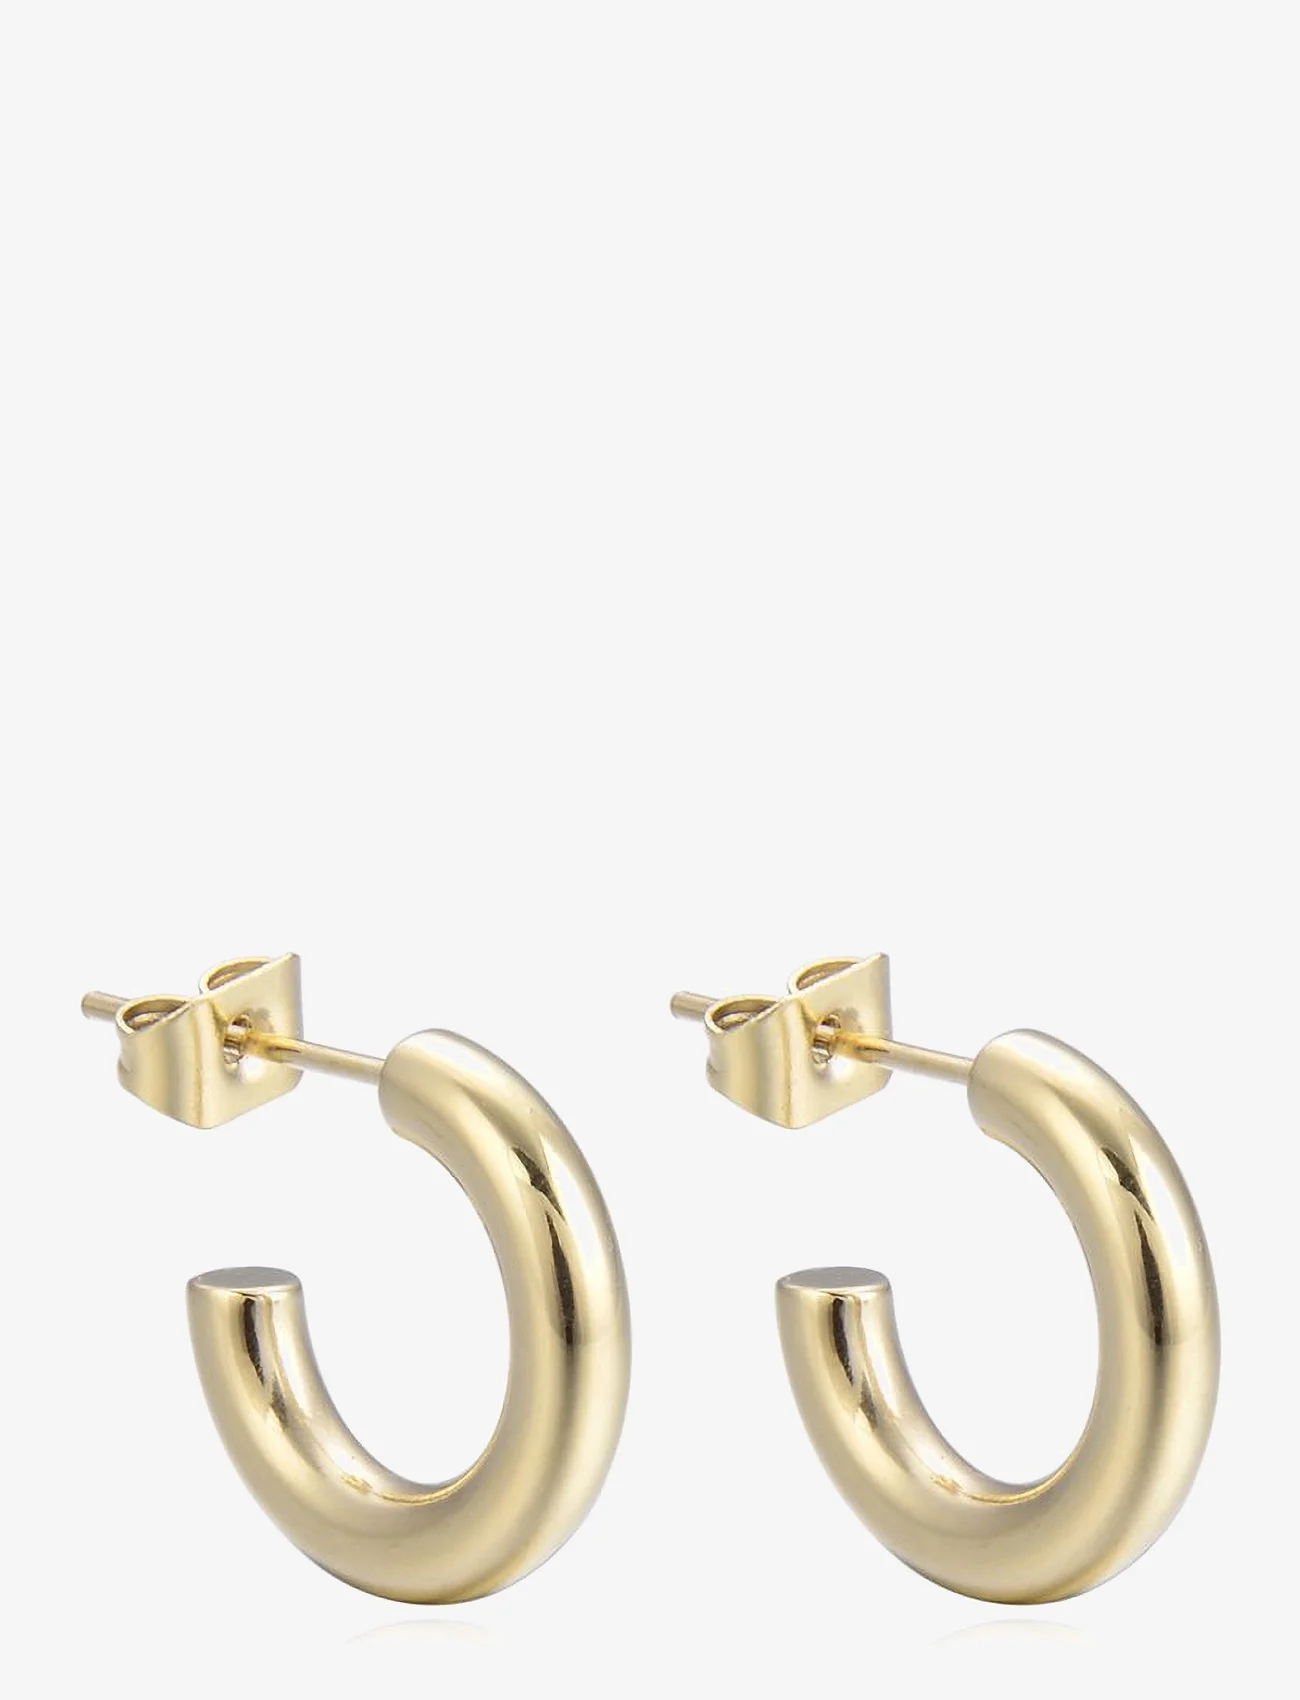 Bud to rose - Hitch Earring - hoops - gold - 0